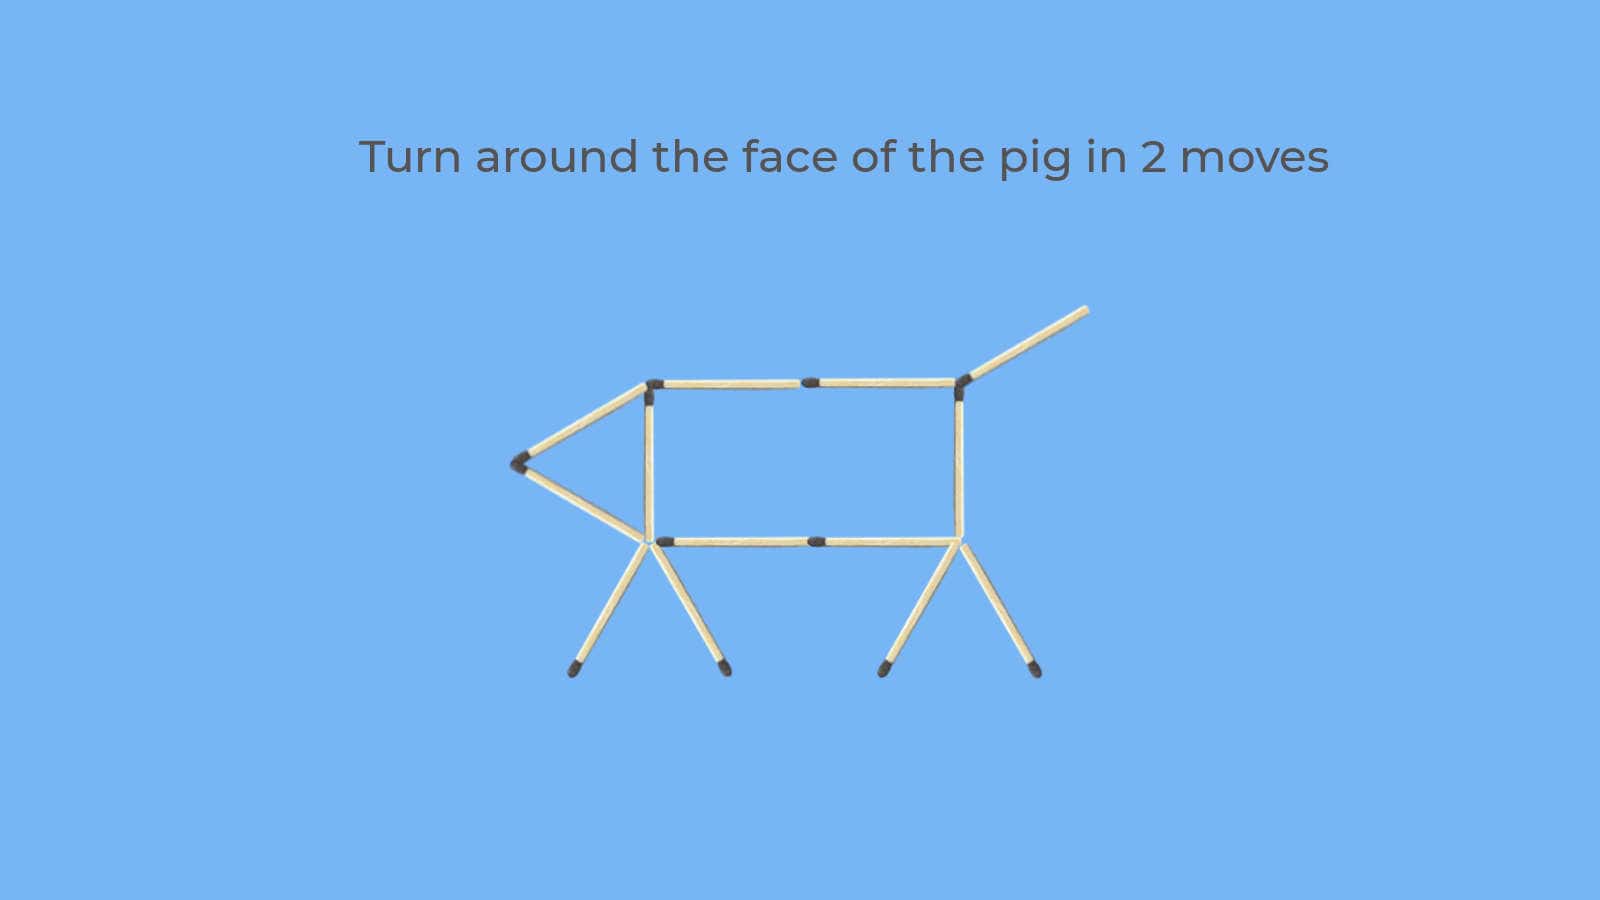 Turn around the face of the pig in 2 moves puzzle